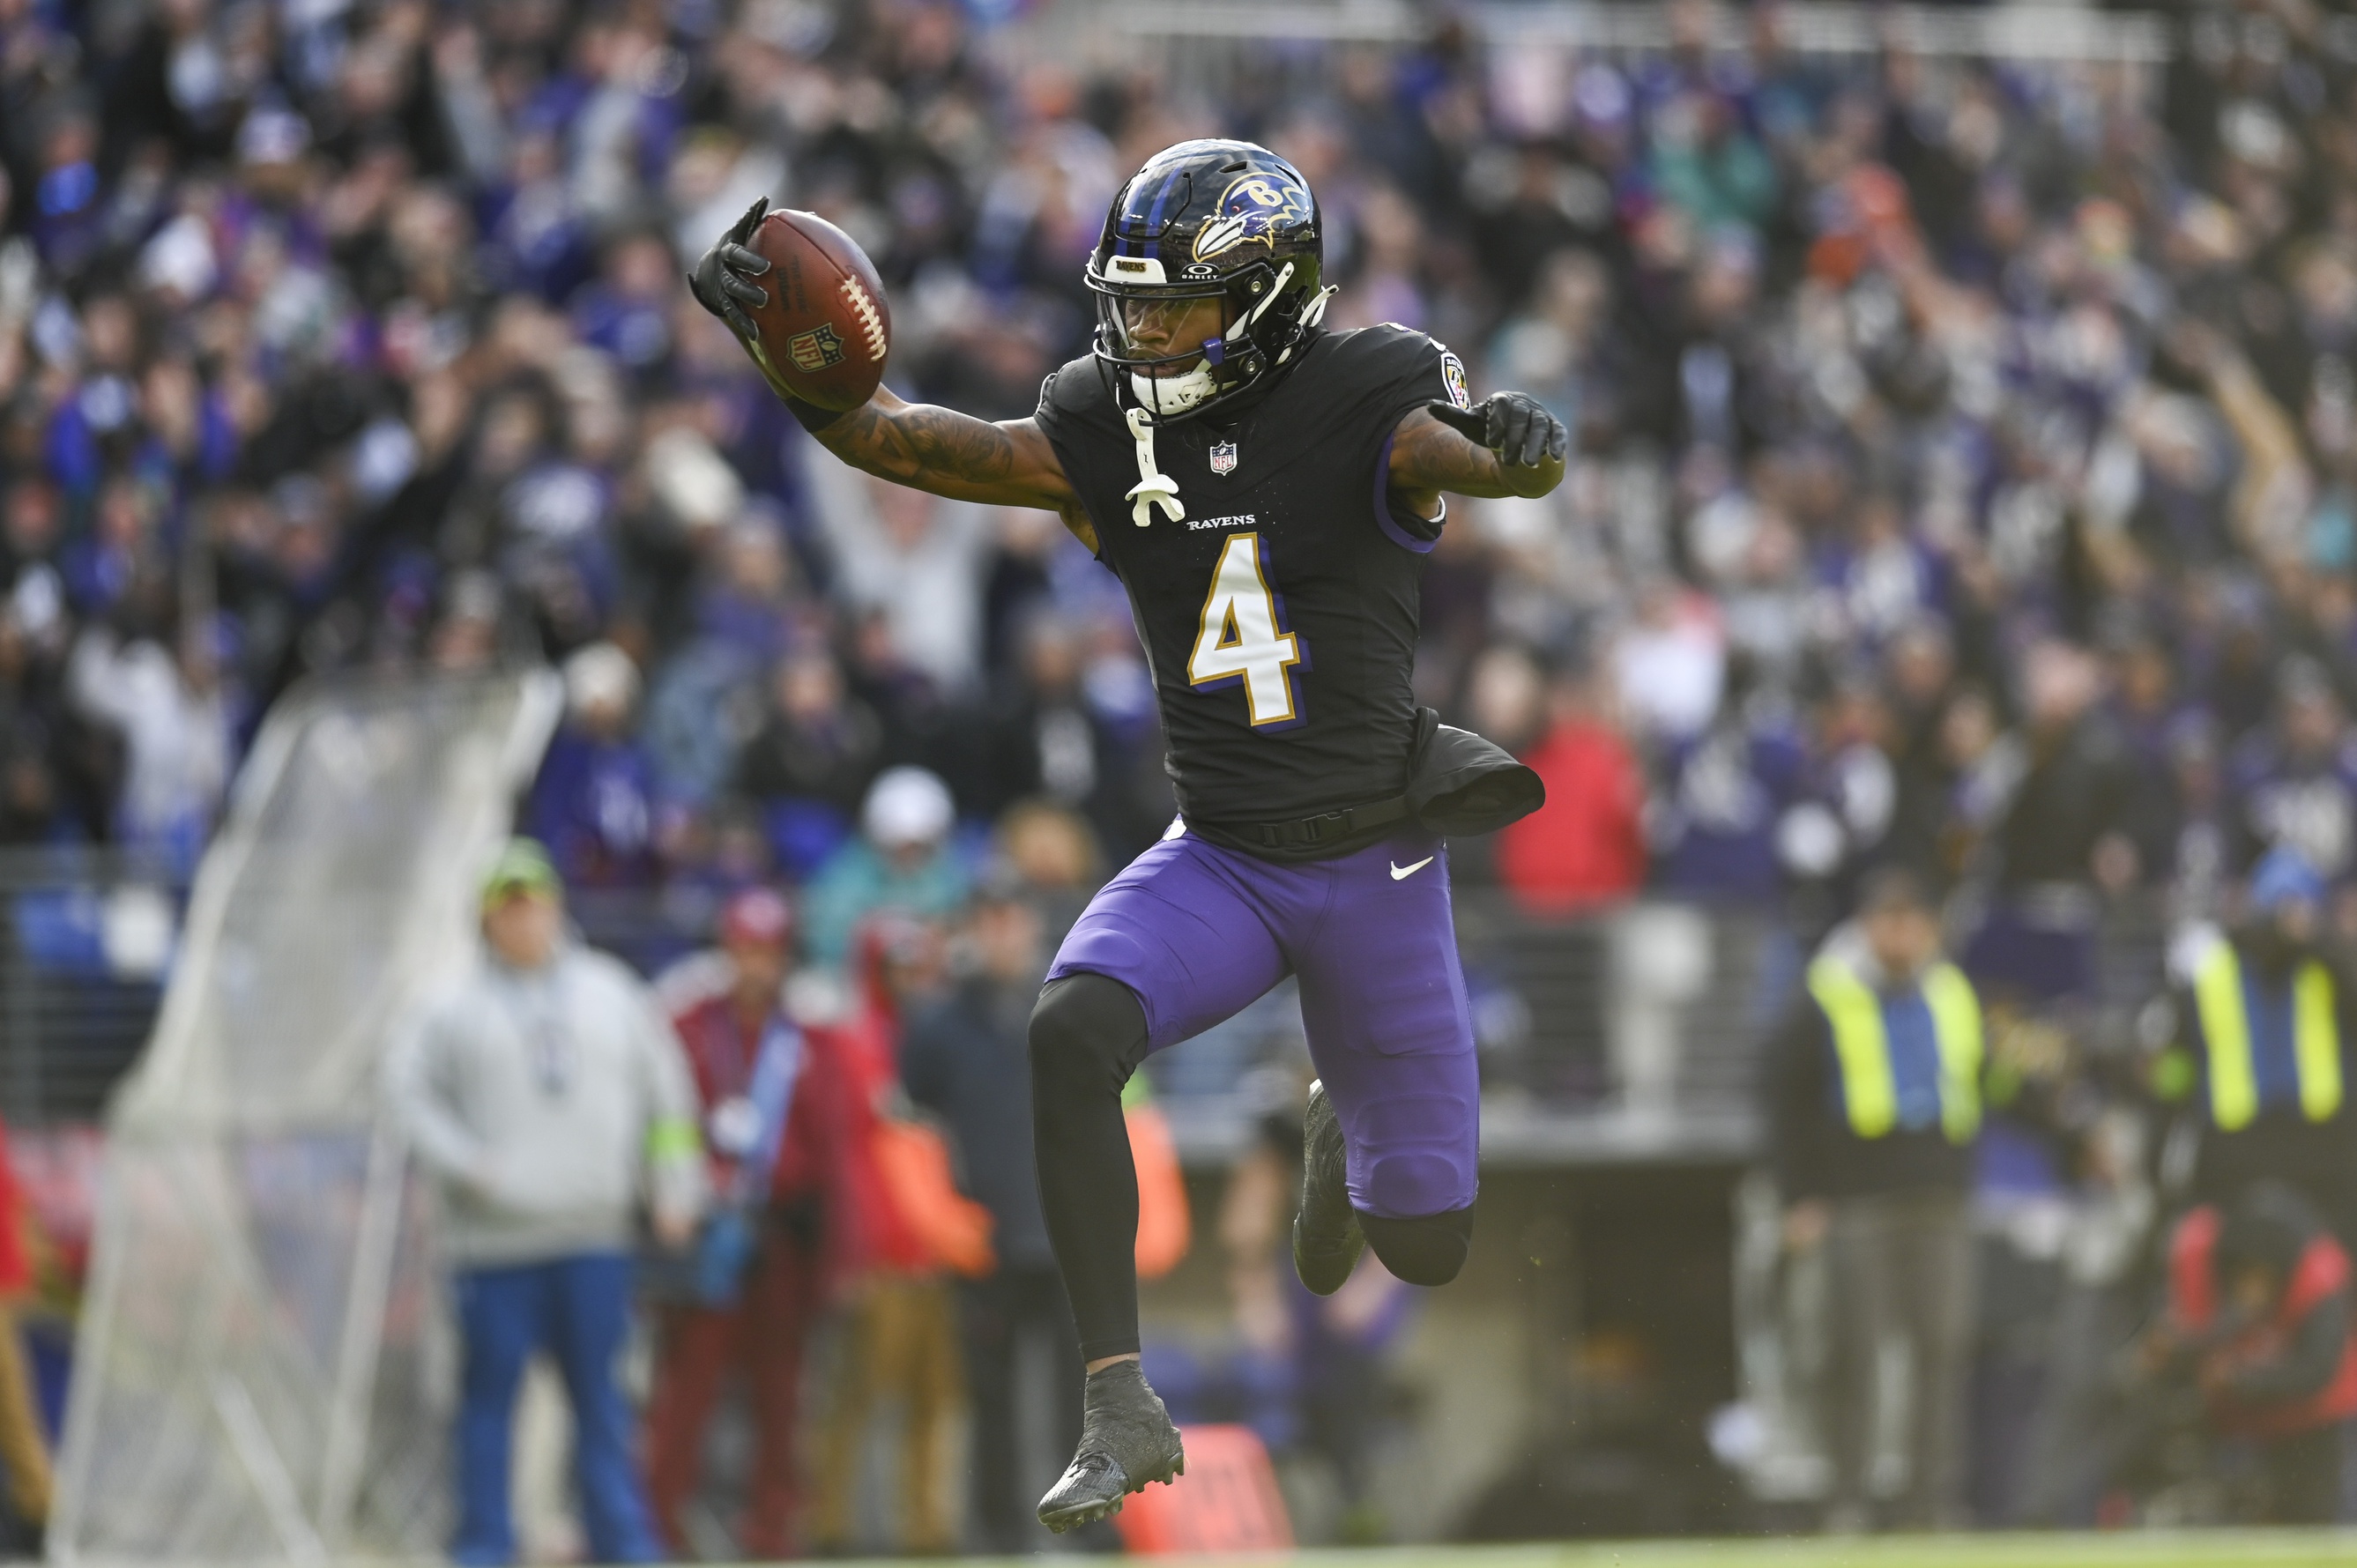 Ravens receiver Zay Flowers is one of Lamar Jackson's main targets with 77 receptions for 858 yards and five touchdowns.